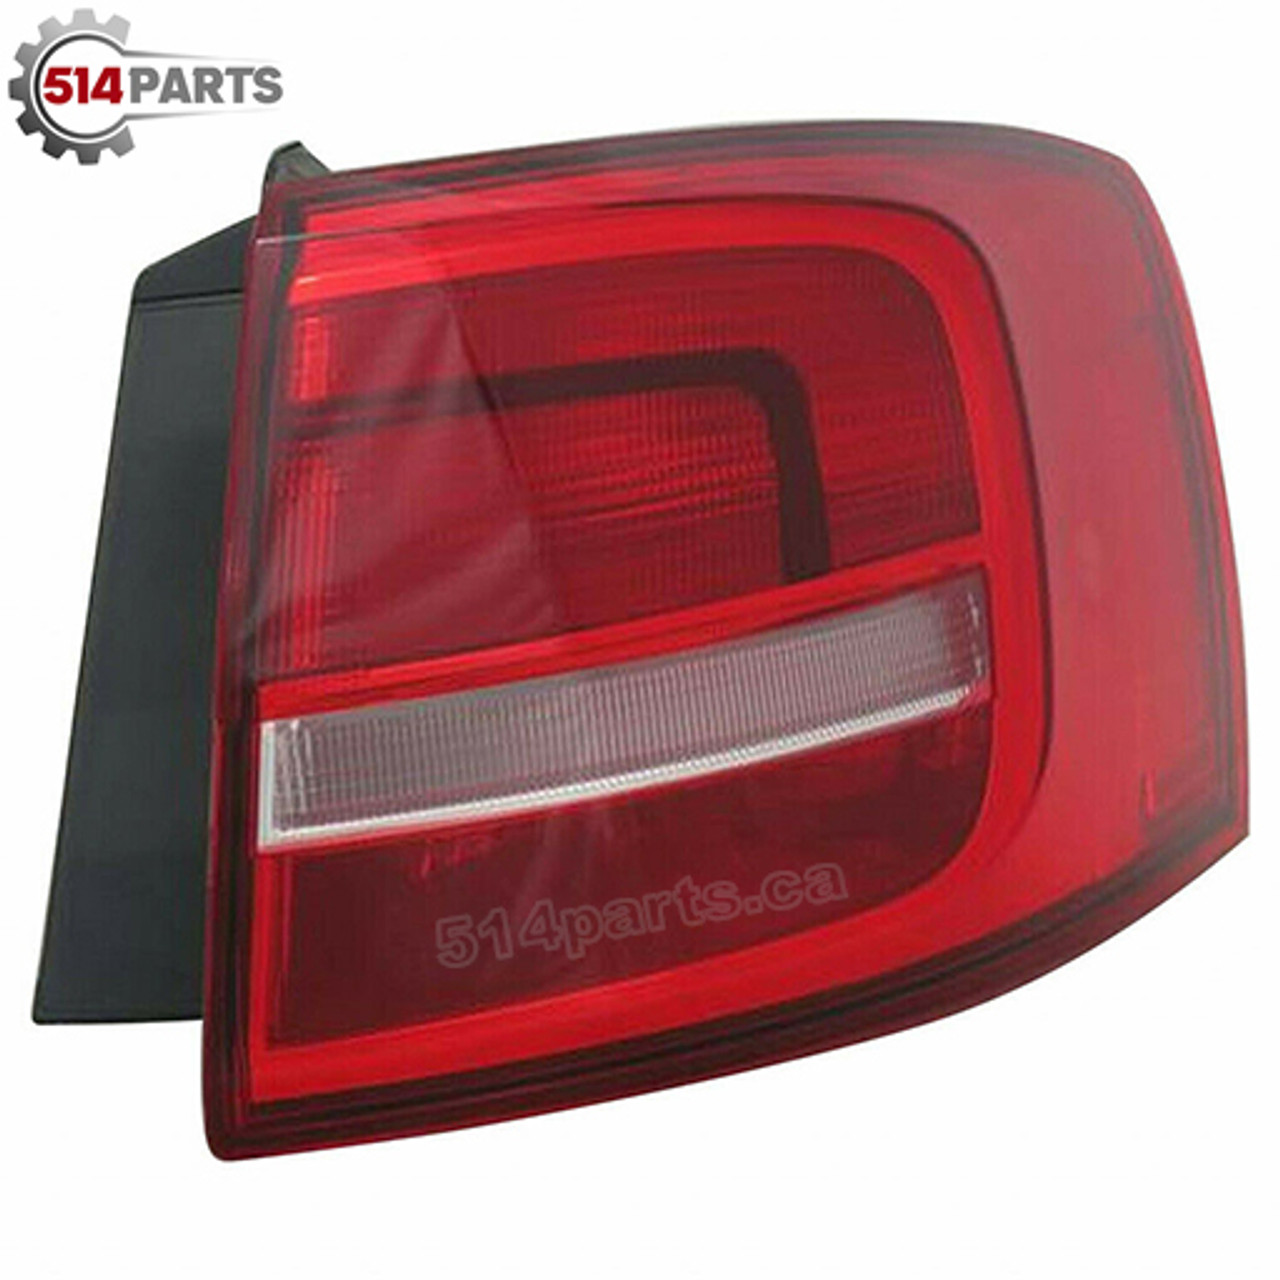 2015 - 2018 VOLKSWAGEN JETTA TAIL LIGHTS BULB TYPE High Quality - PHARES ARRIERE AMPOULE Haute Qualite